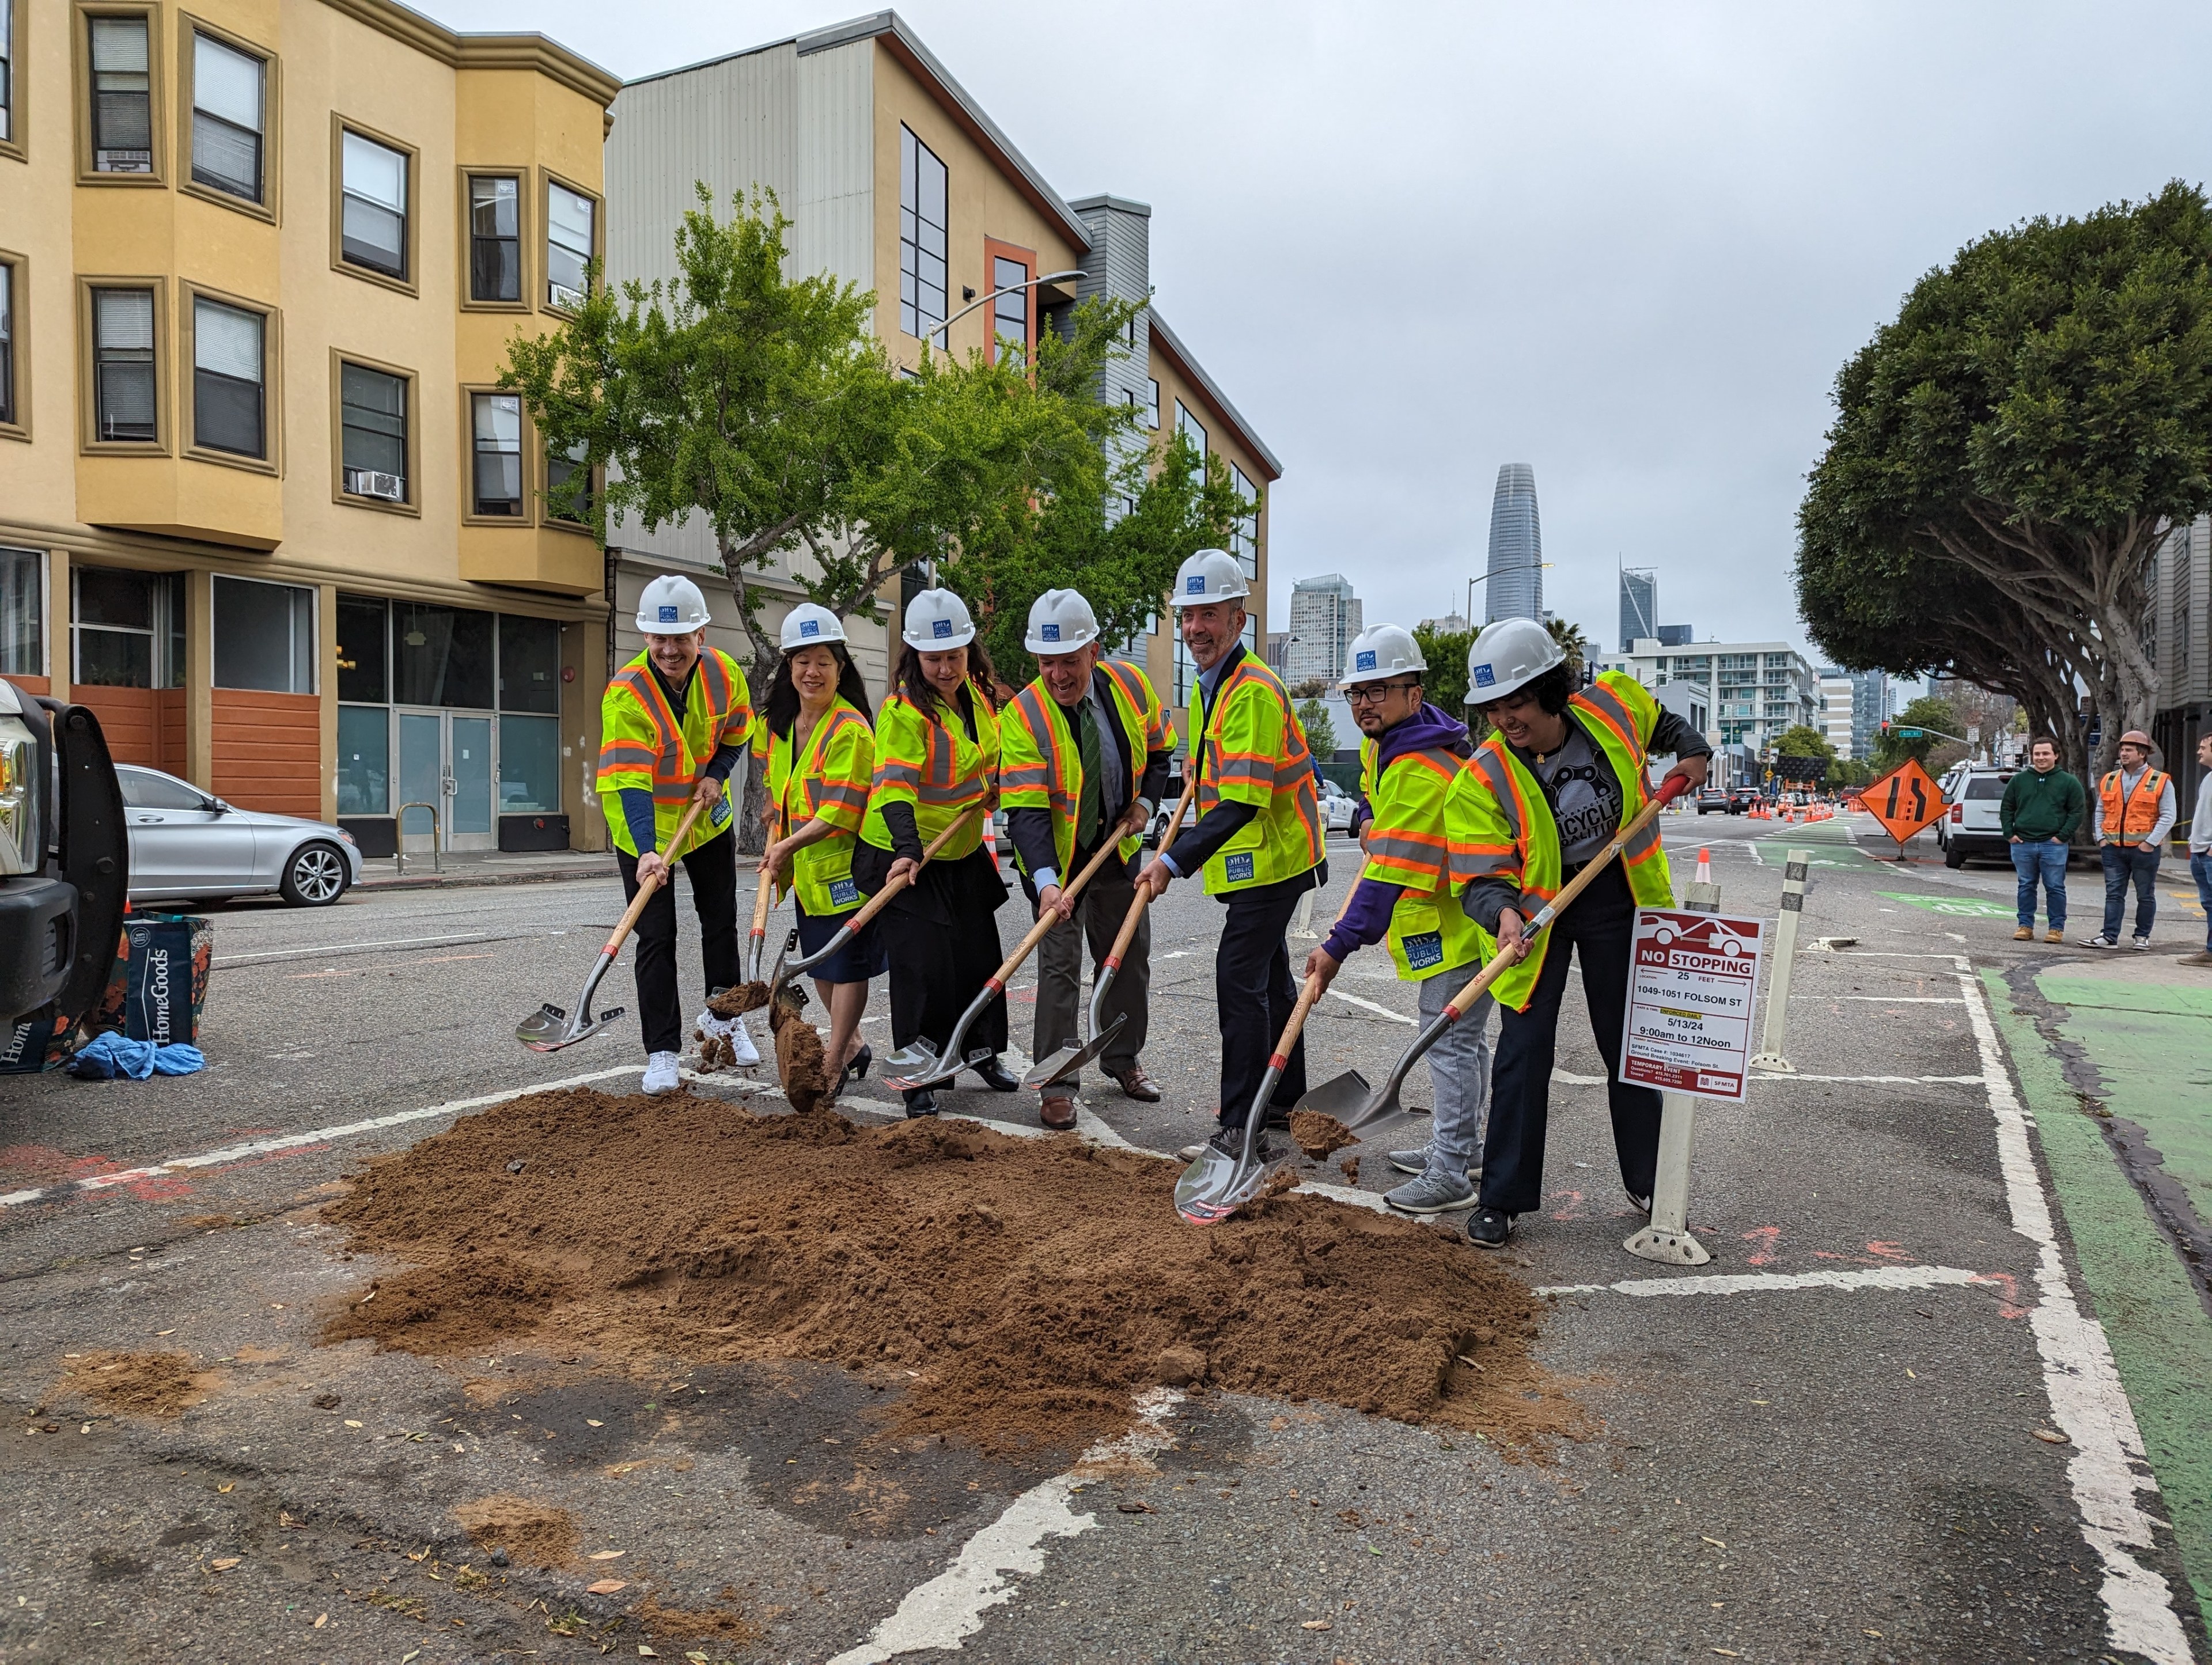 A group of people wearing hard hats shovel dirt on a city street.